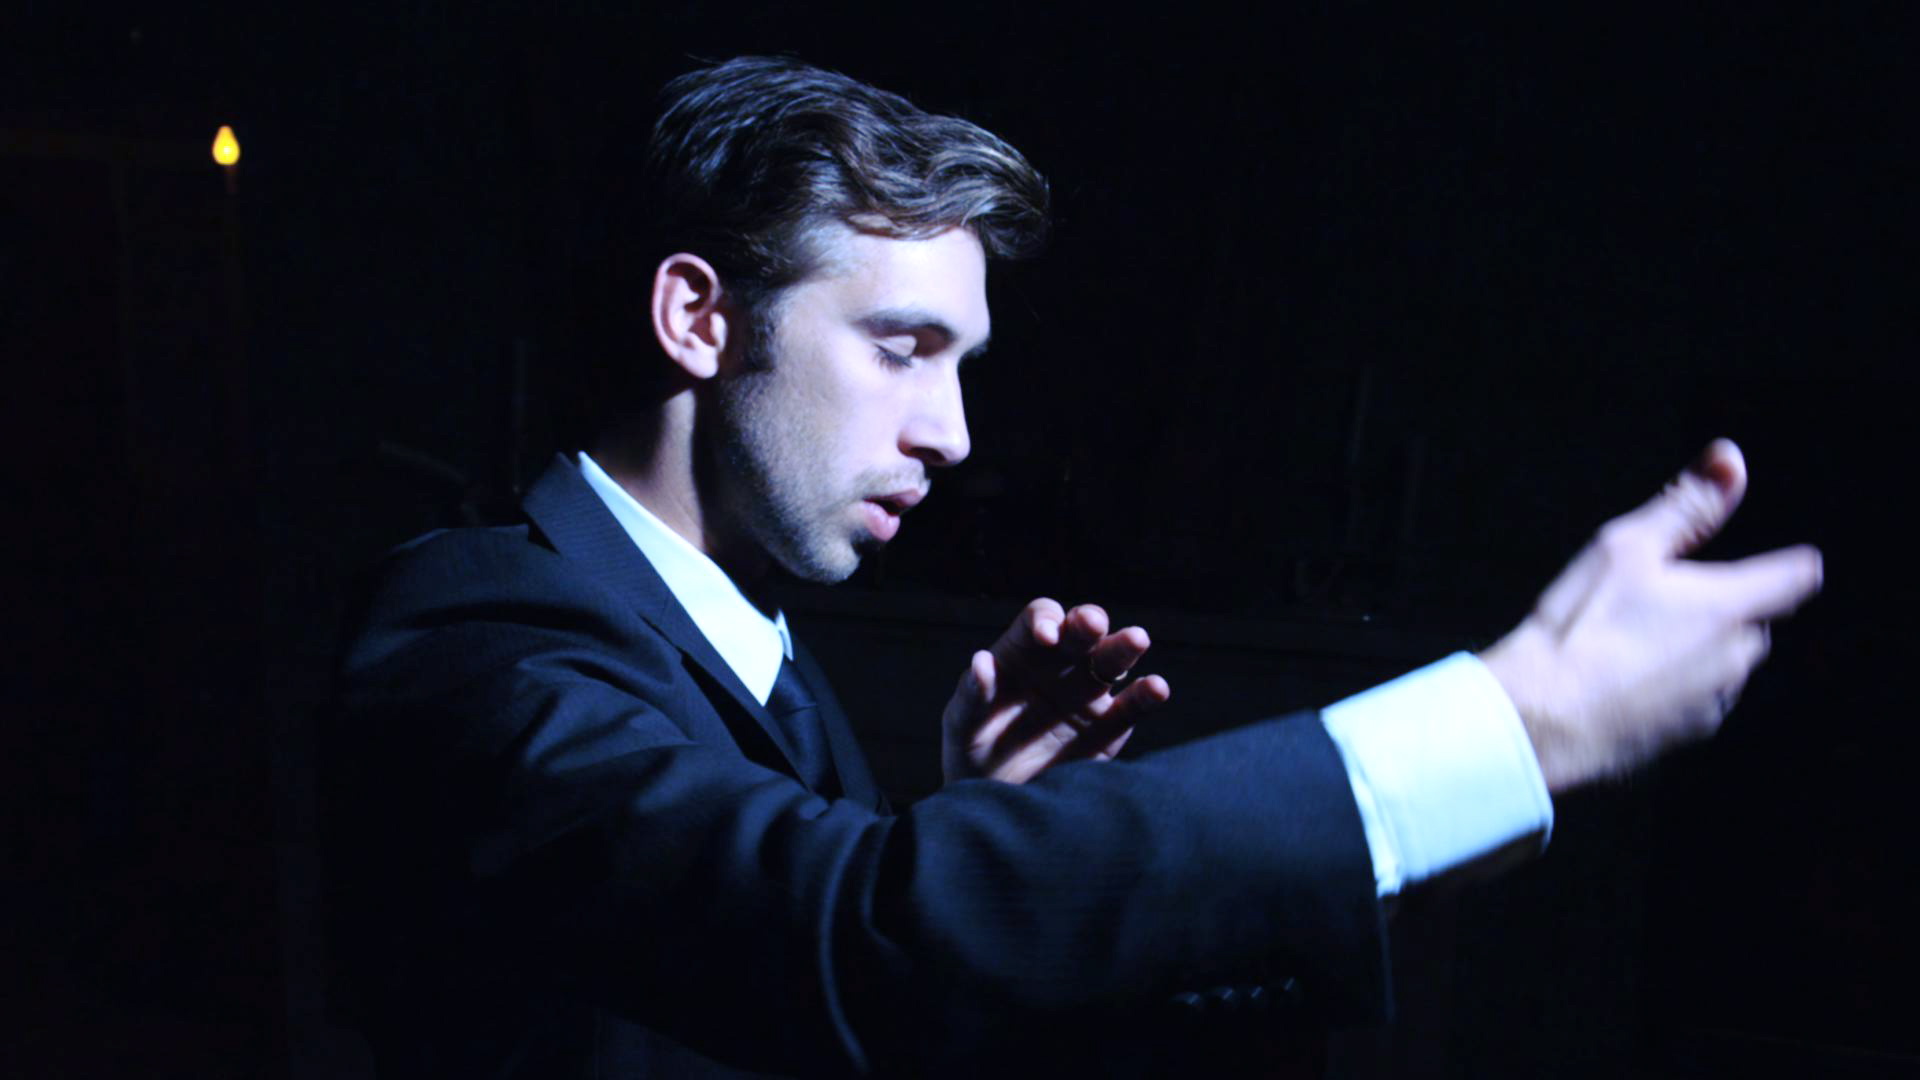 Blake Berris (Jesse) conducts Beethoven in Michael Bartlett's 